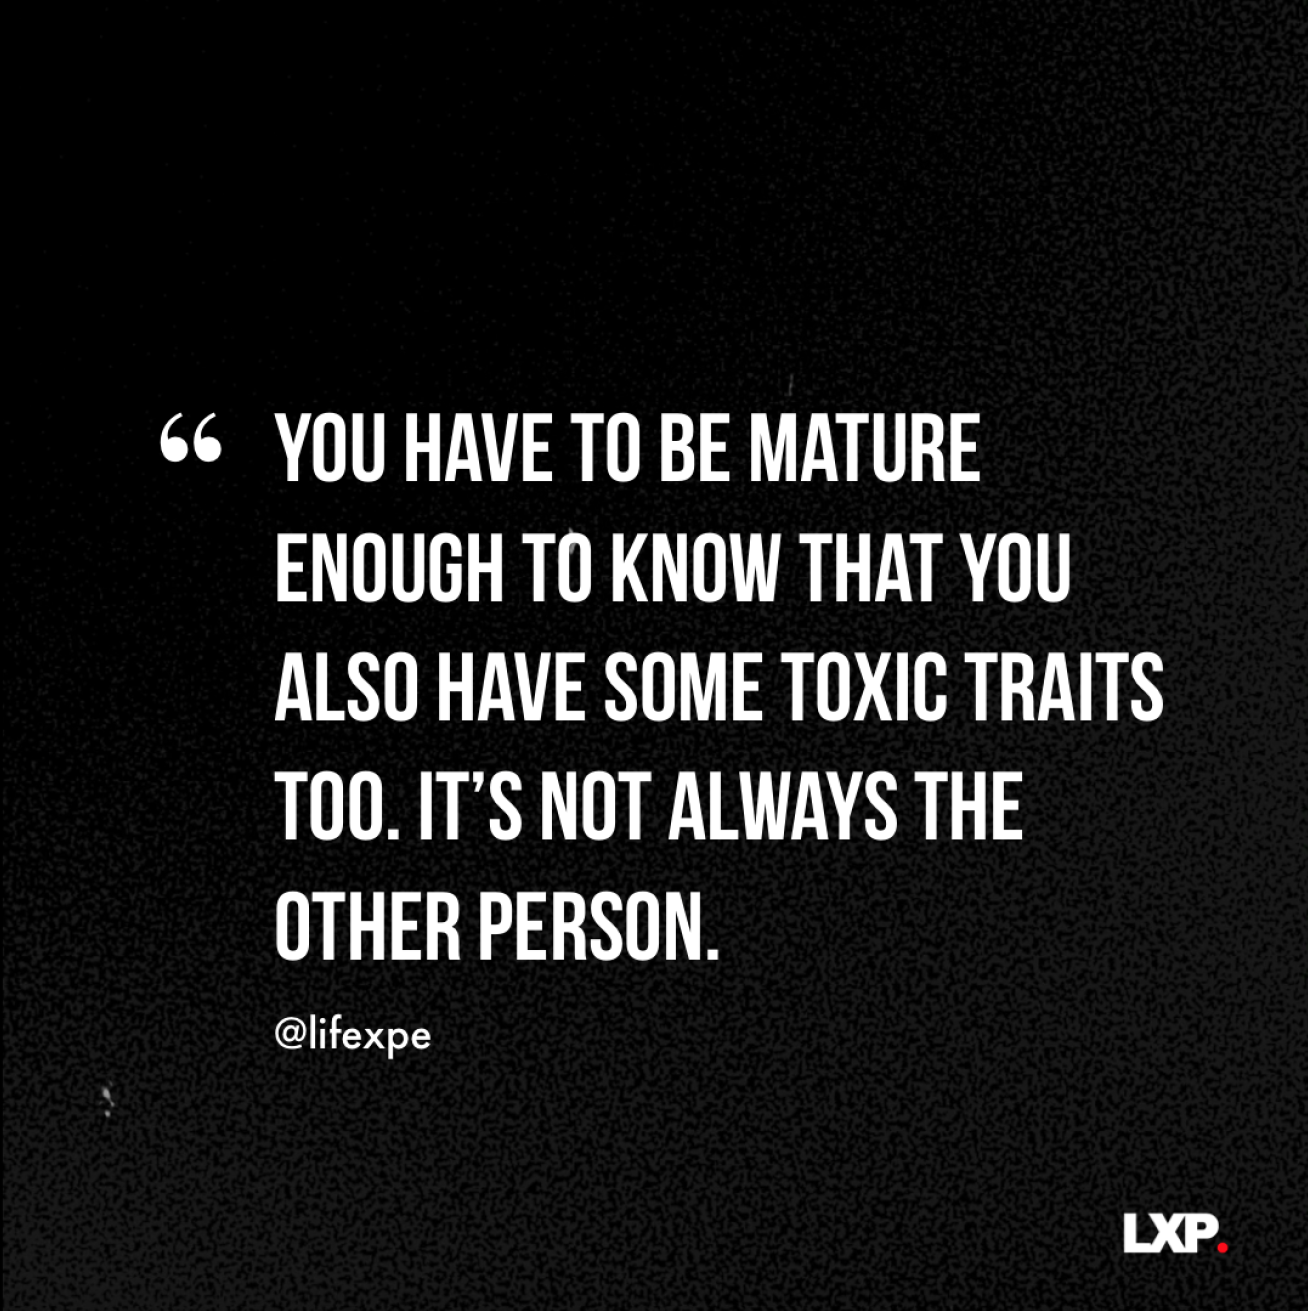 Be Mature Enough To Know That You Also Have Some Toxic Traits - Lifexpe™